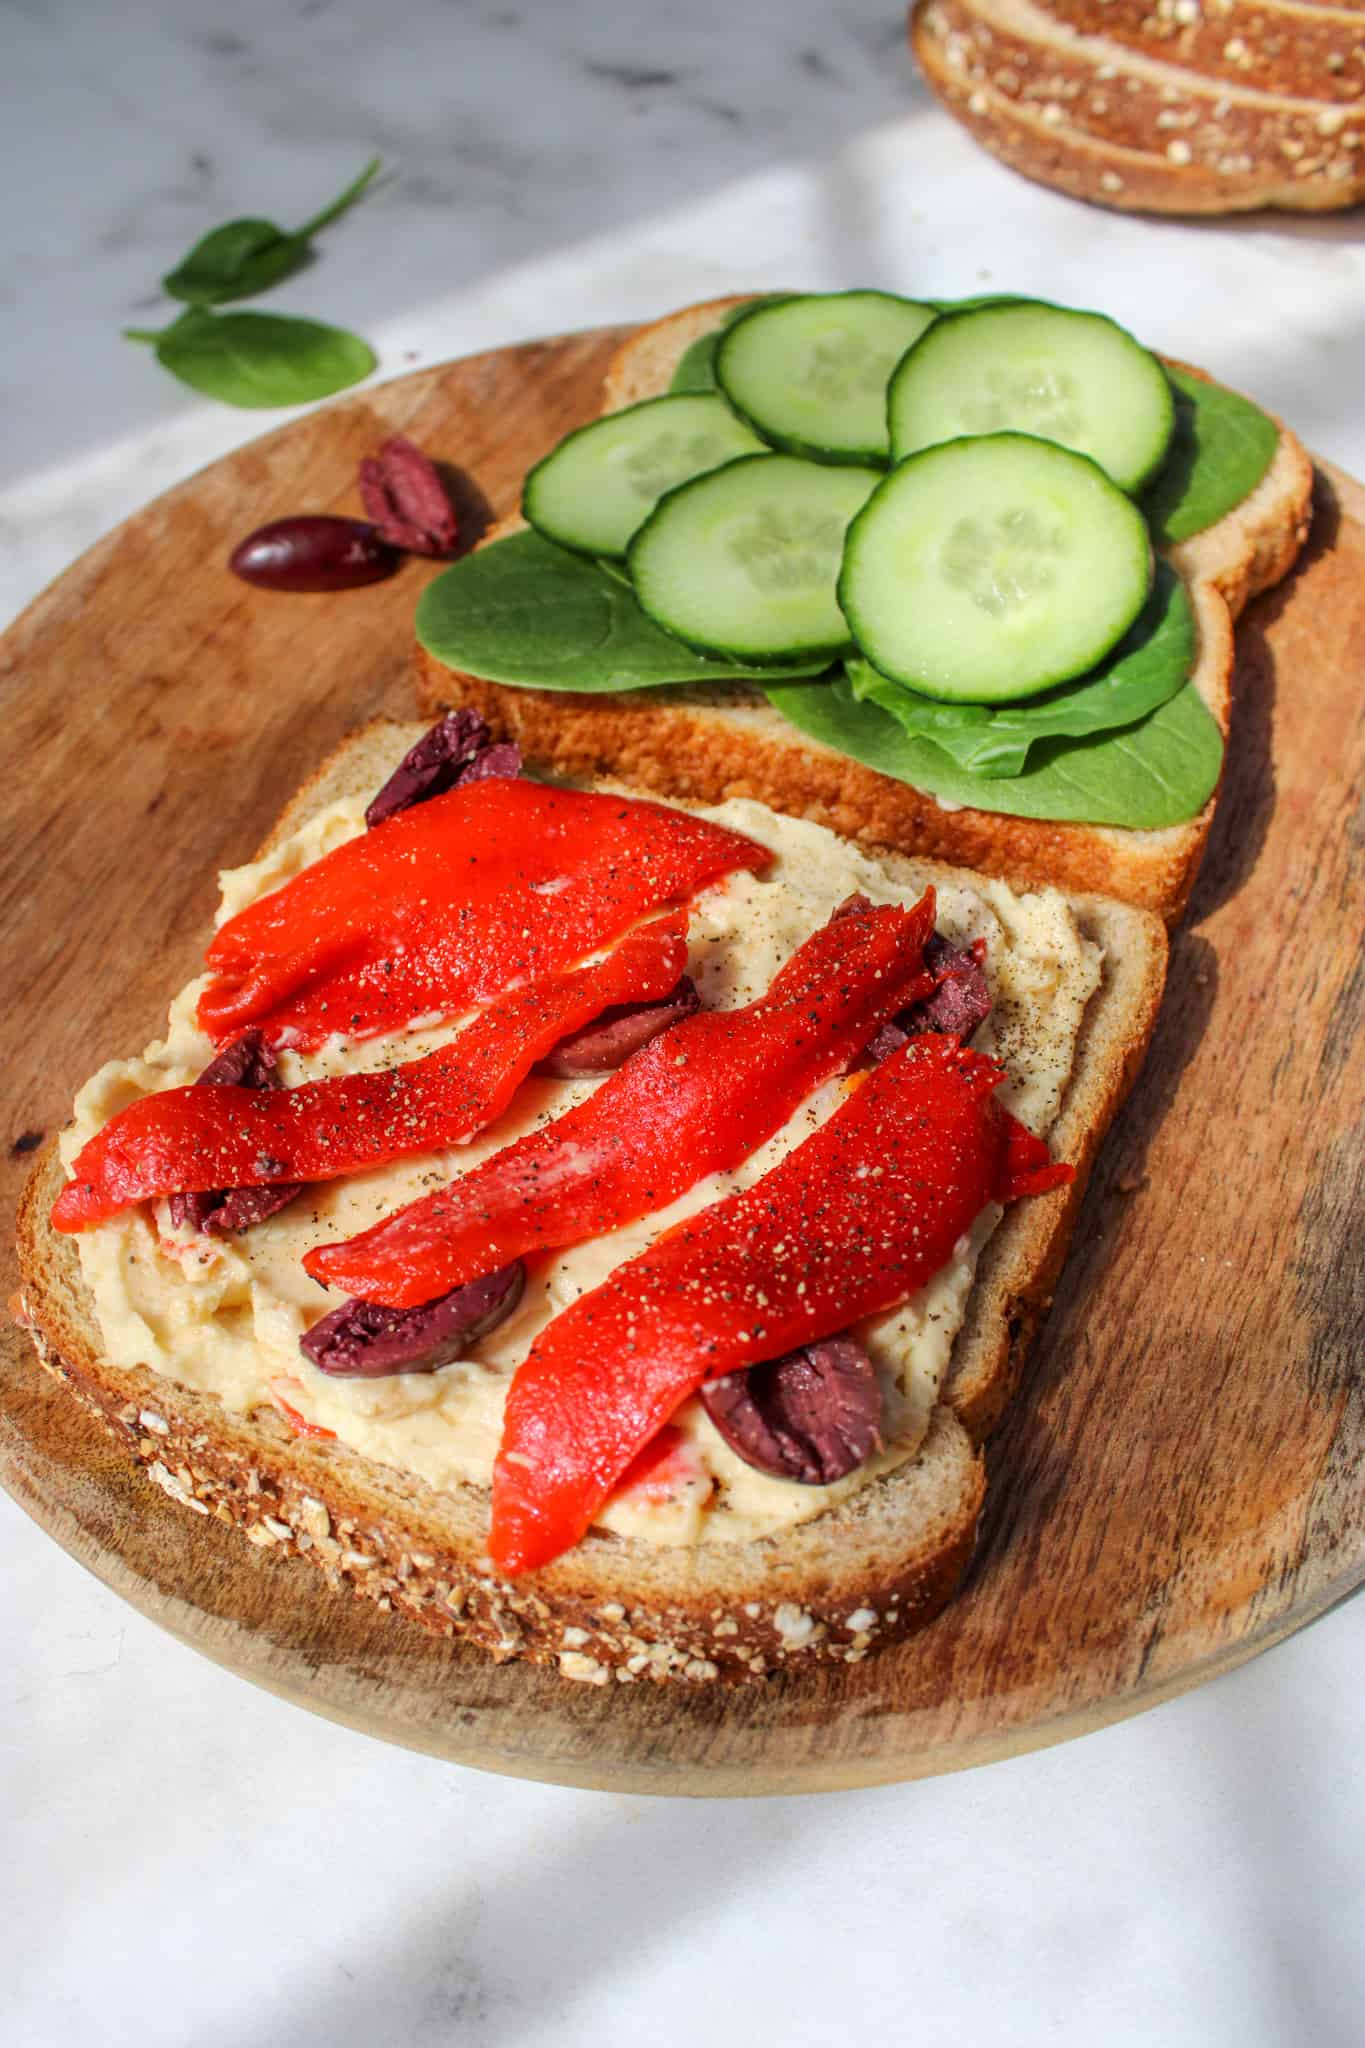 wooden plate with two slices of bread, one topped with hummus, olives and red peppers, the other with spinach and cucumber.